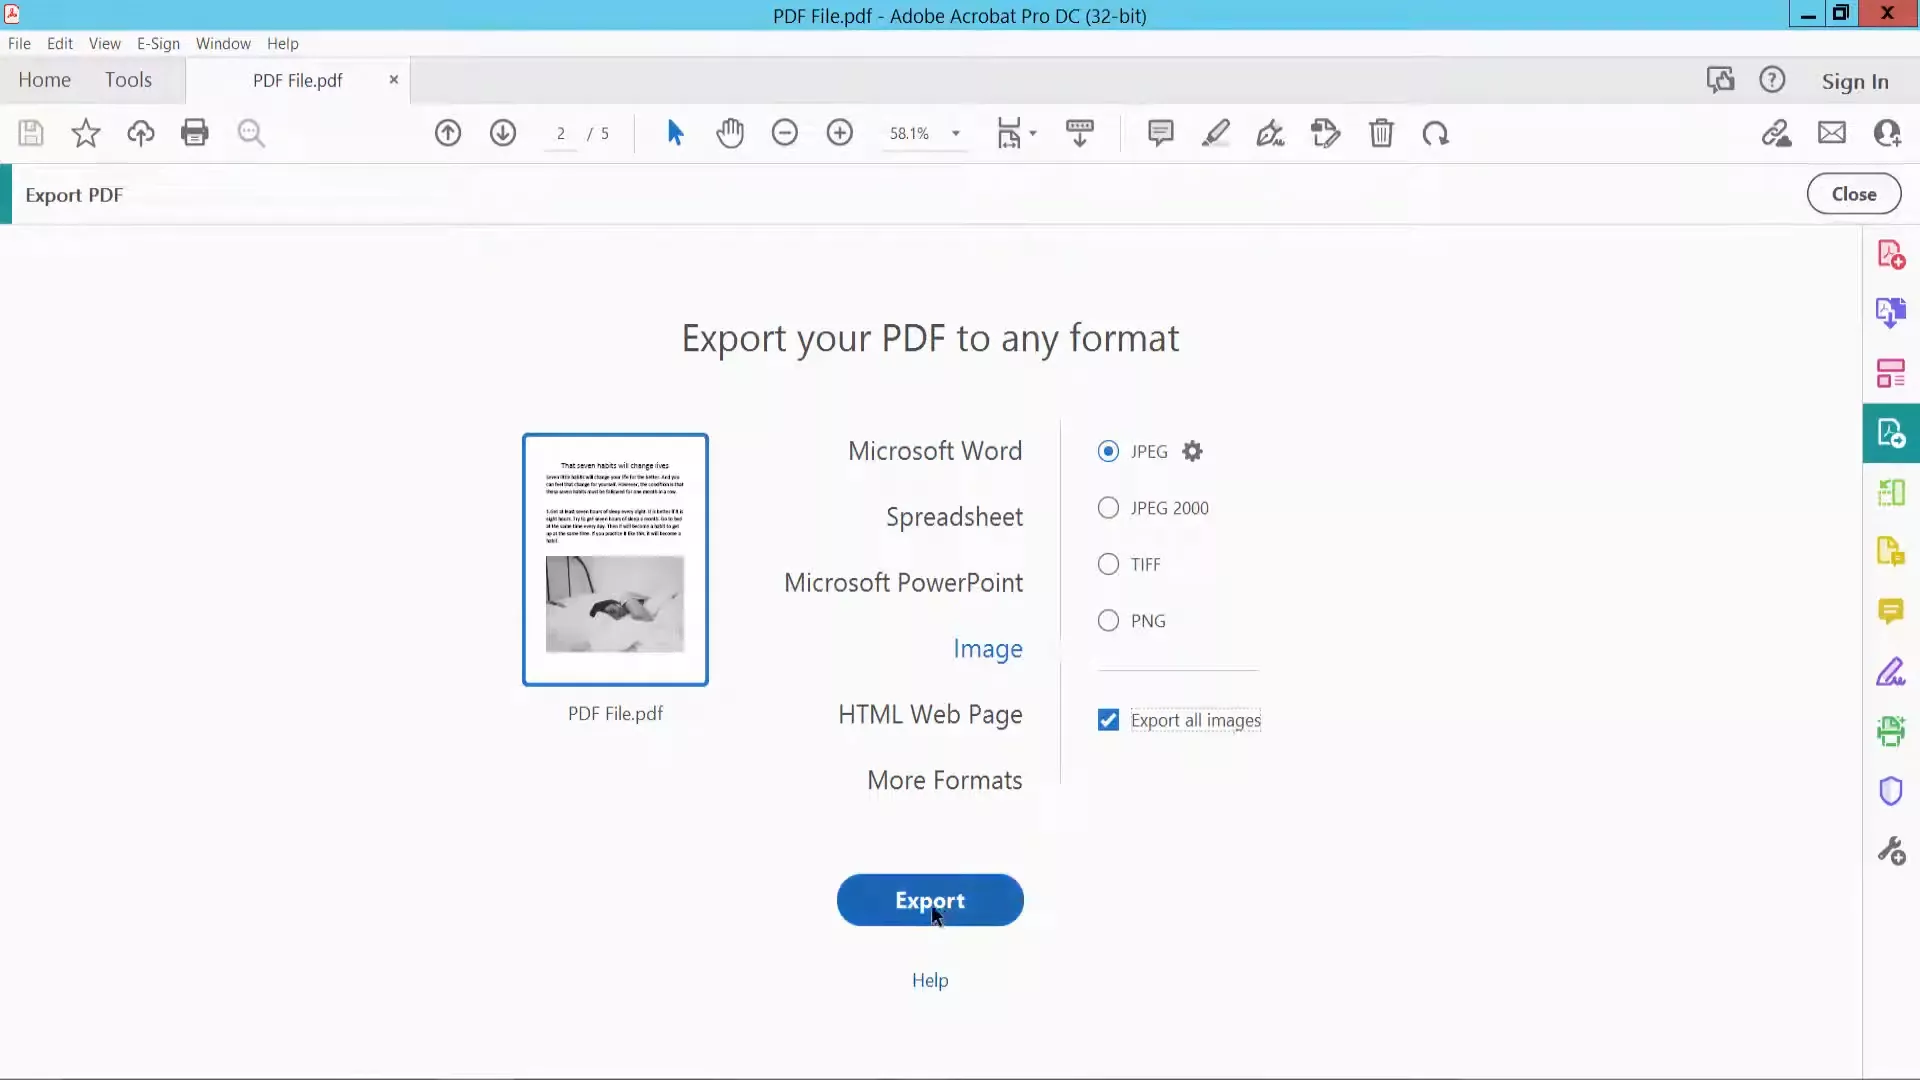 select file format and click export to extract all images with acrobat